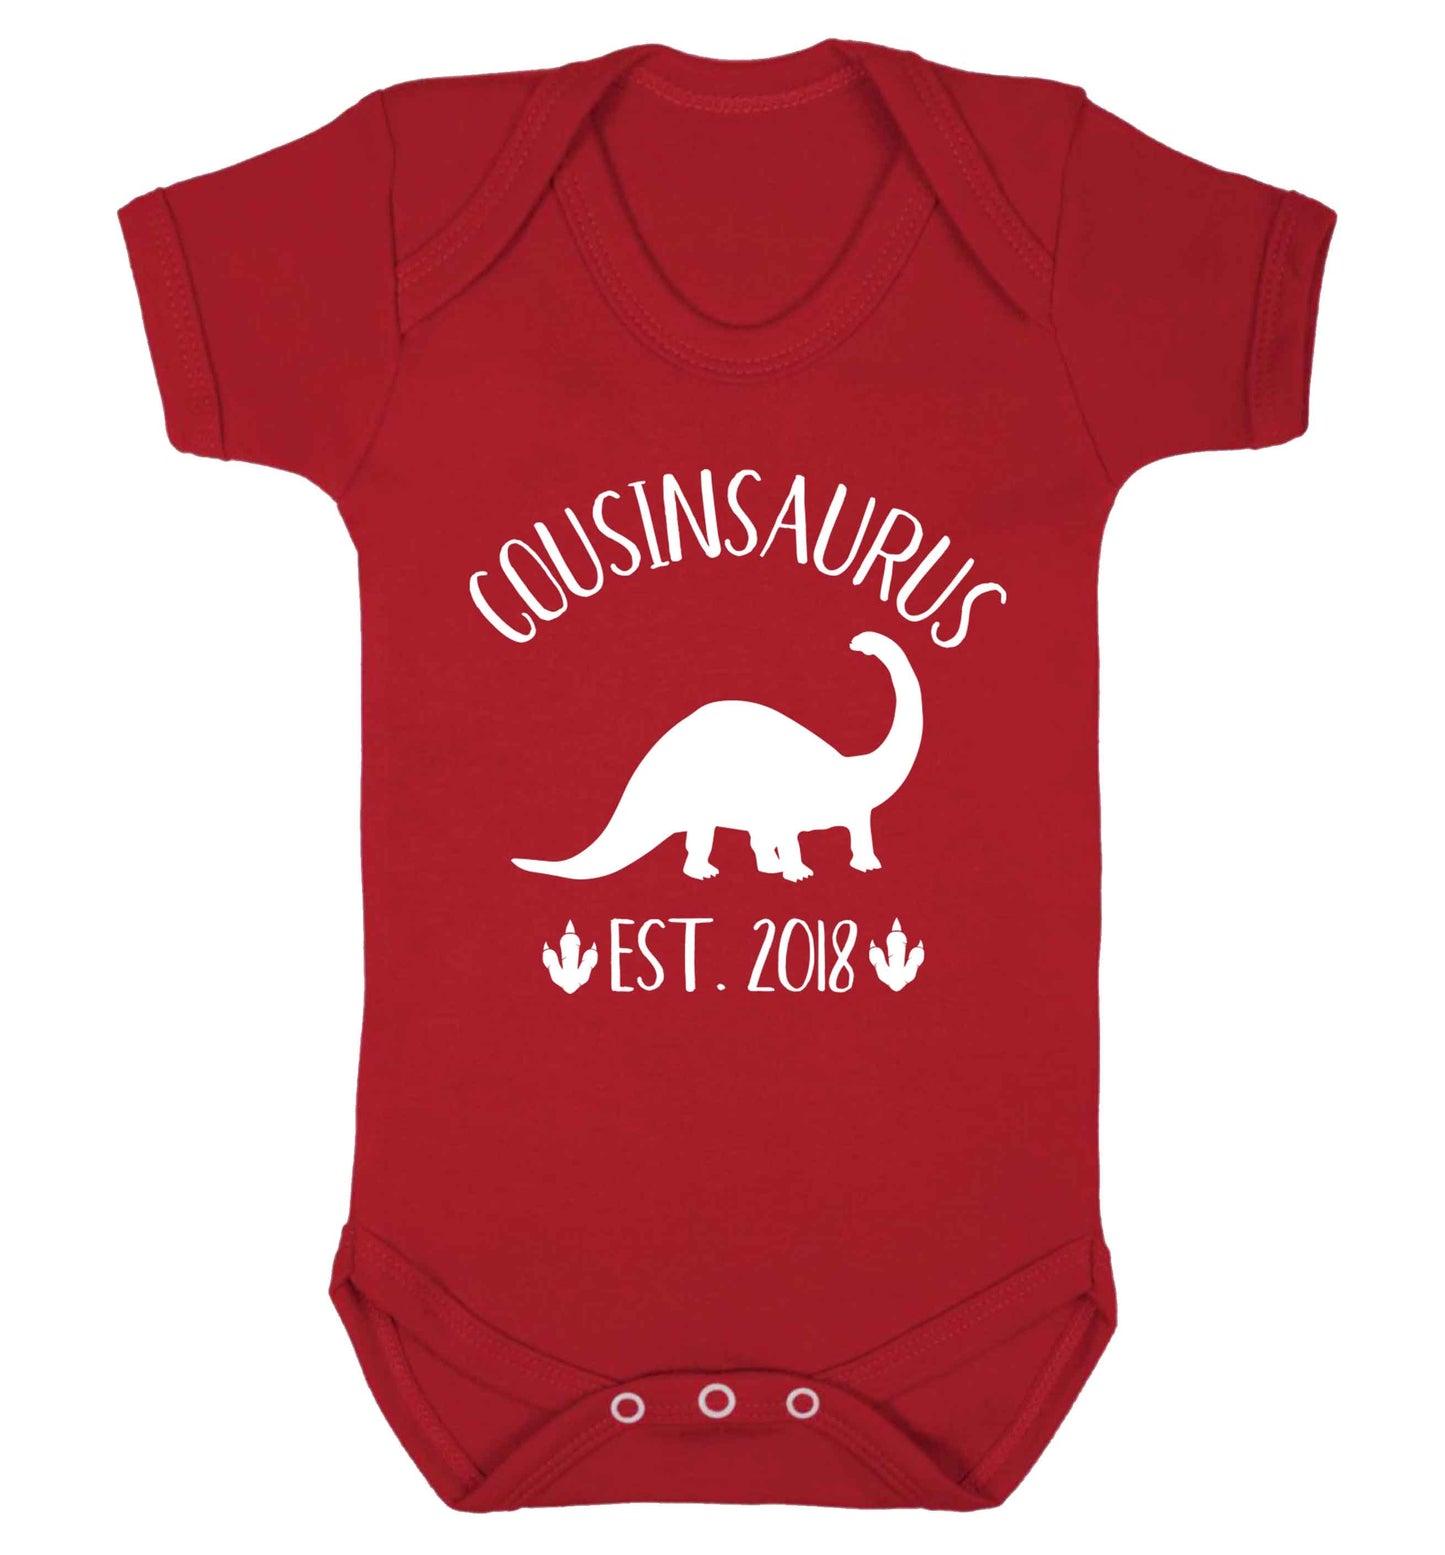 Personalised cousinsaurus since (custom date) Baby Vest red 18-24 months